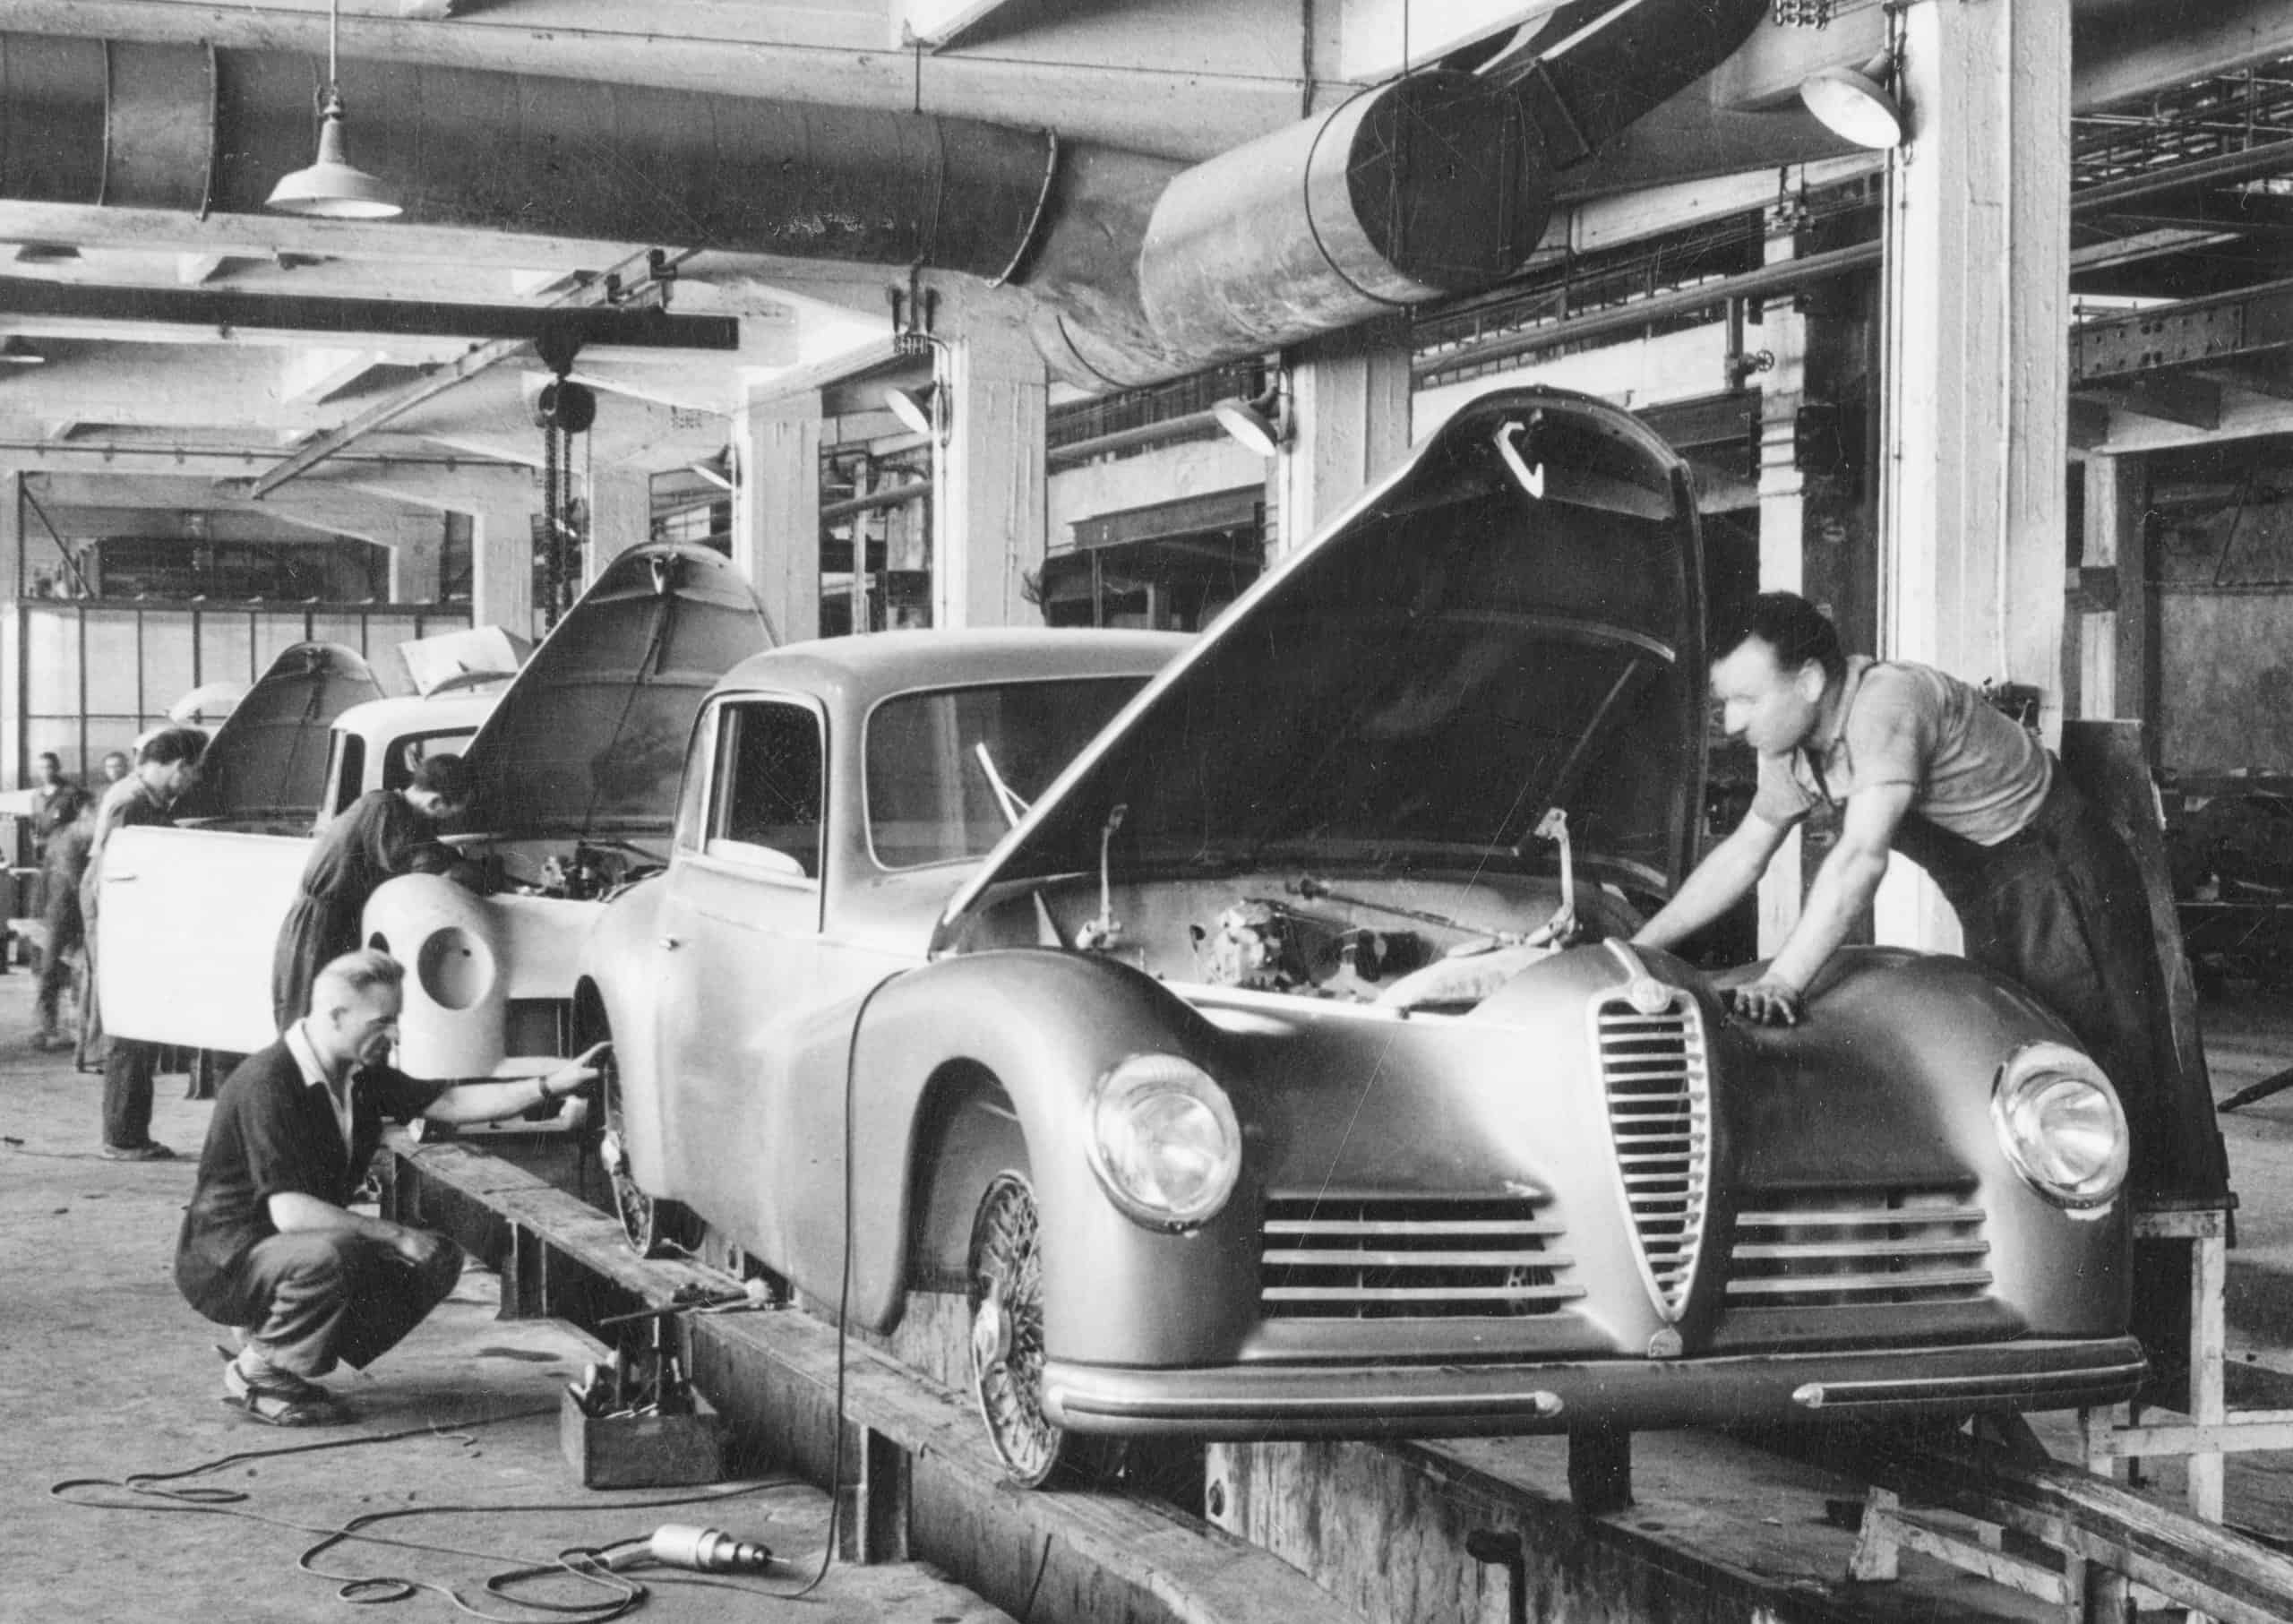 Alfa 6C 2500, Alfa 6C 2500 encapsulates transition from artisan to industrial production, ClassicCars.com Journal